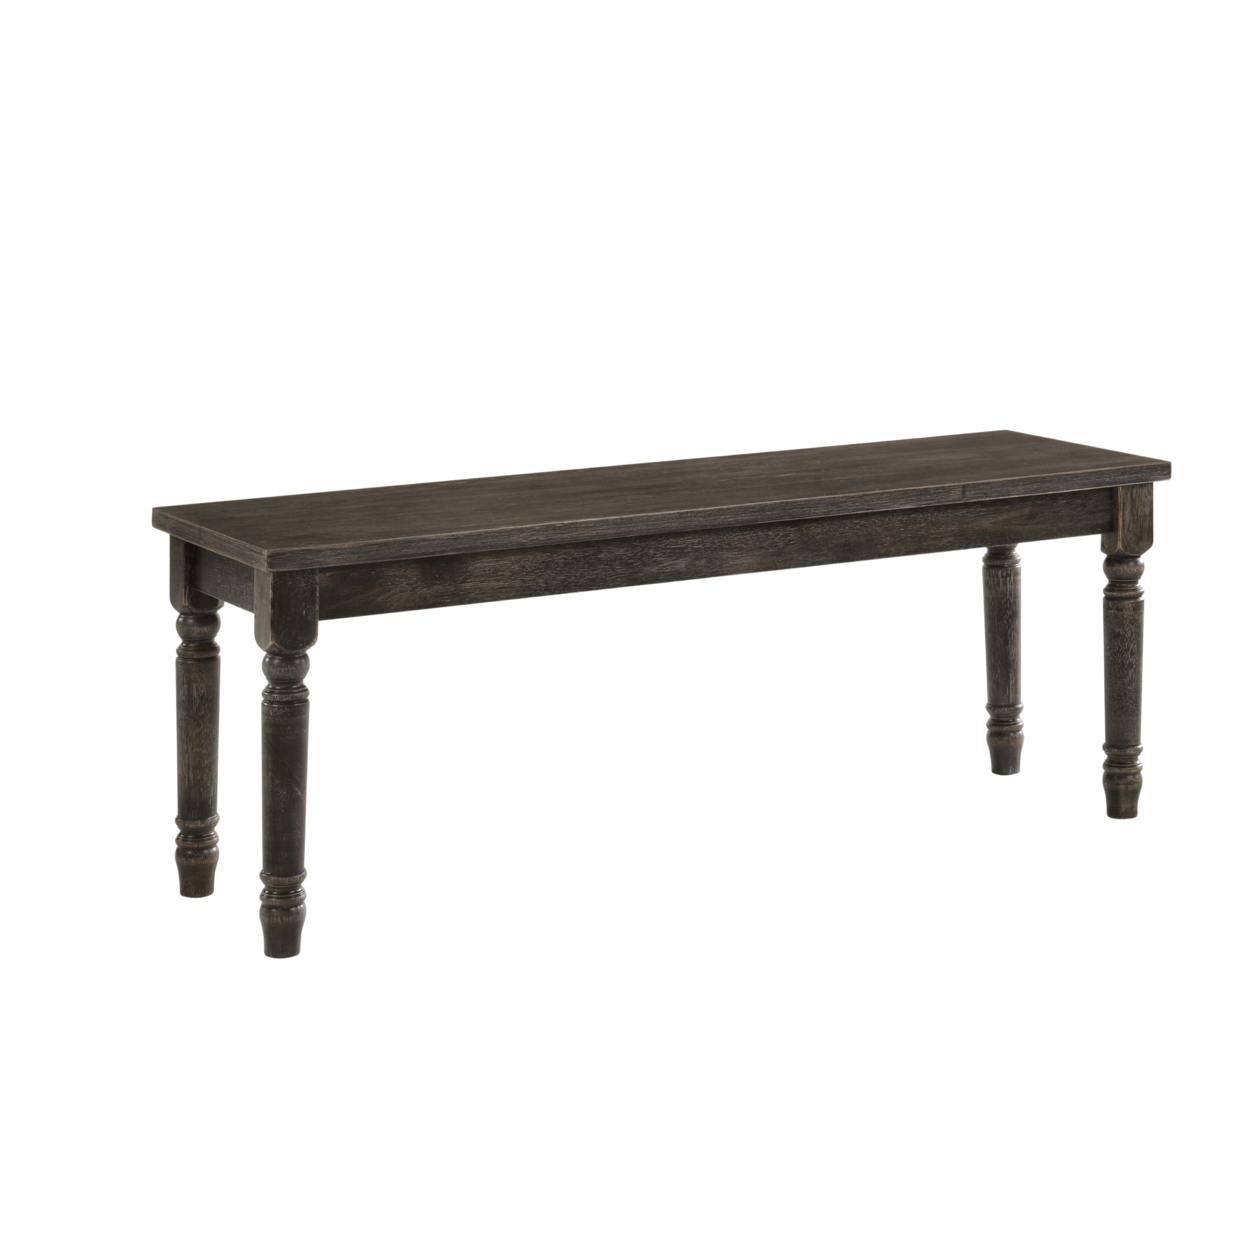 Transitional Style Rectangular Wooden Bench With Turned Legs, Bench- Saltoro Sherpi